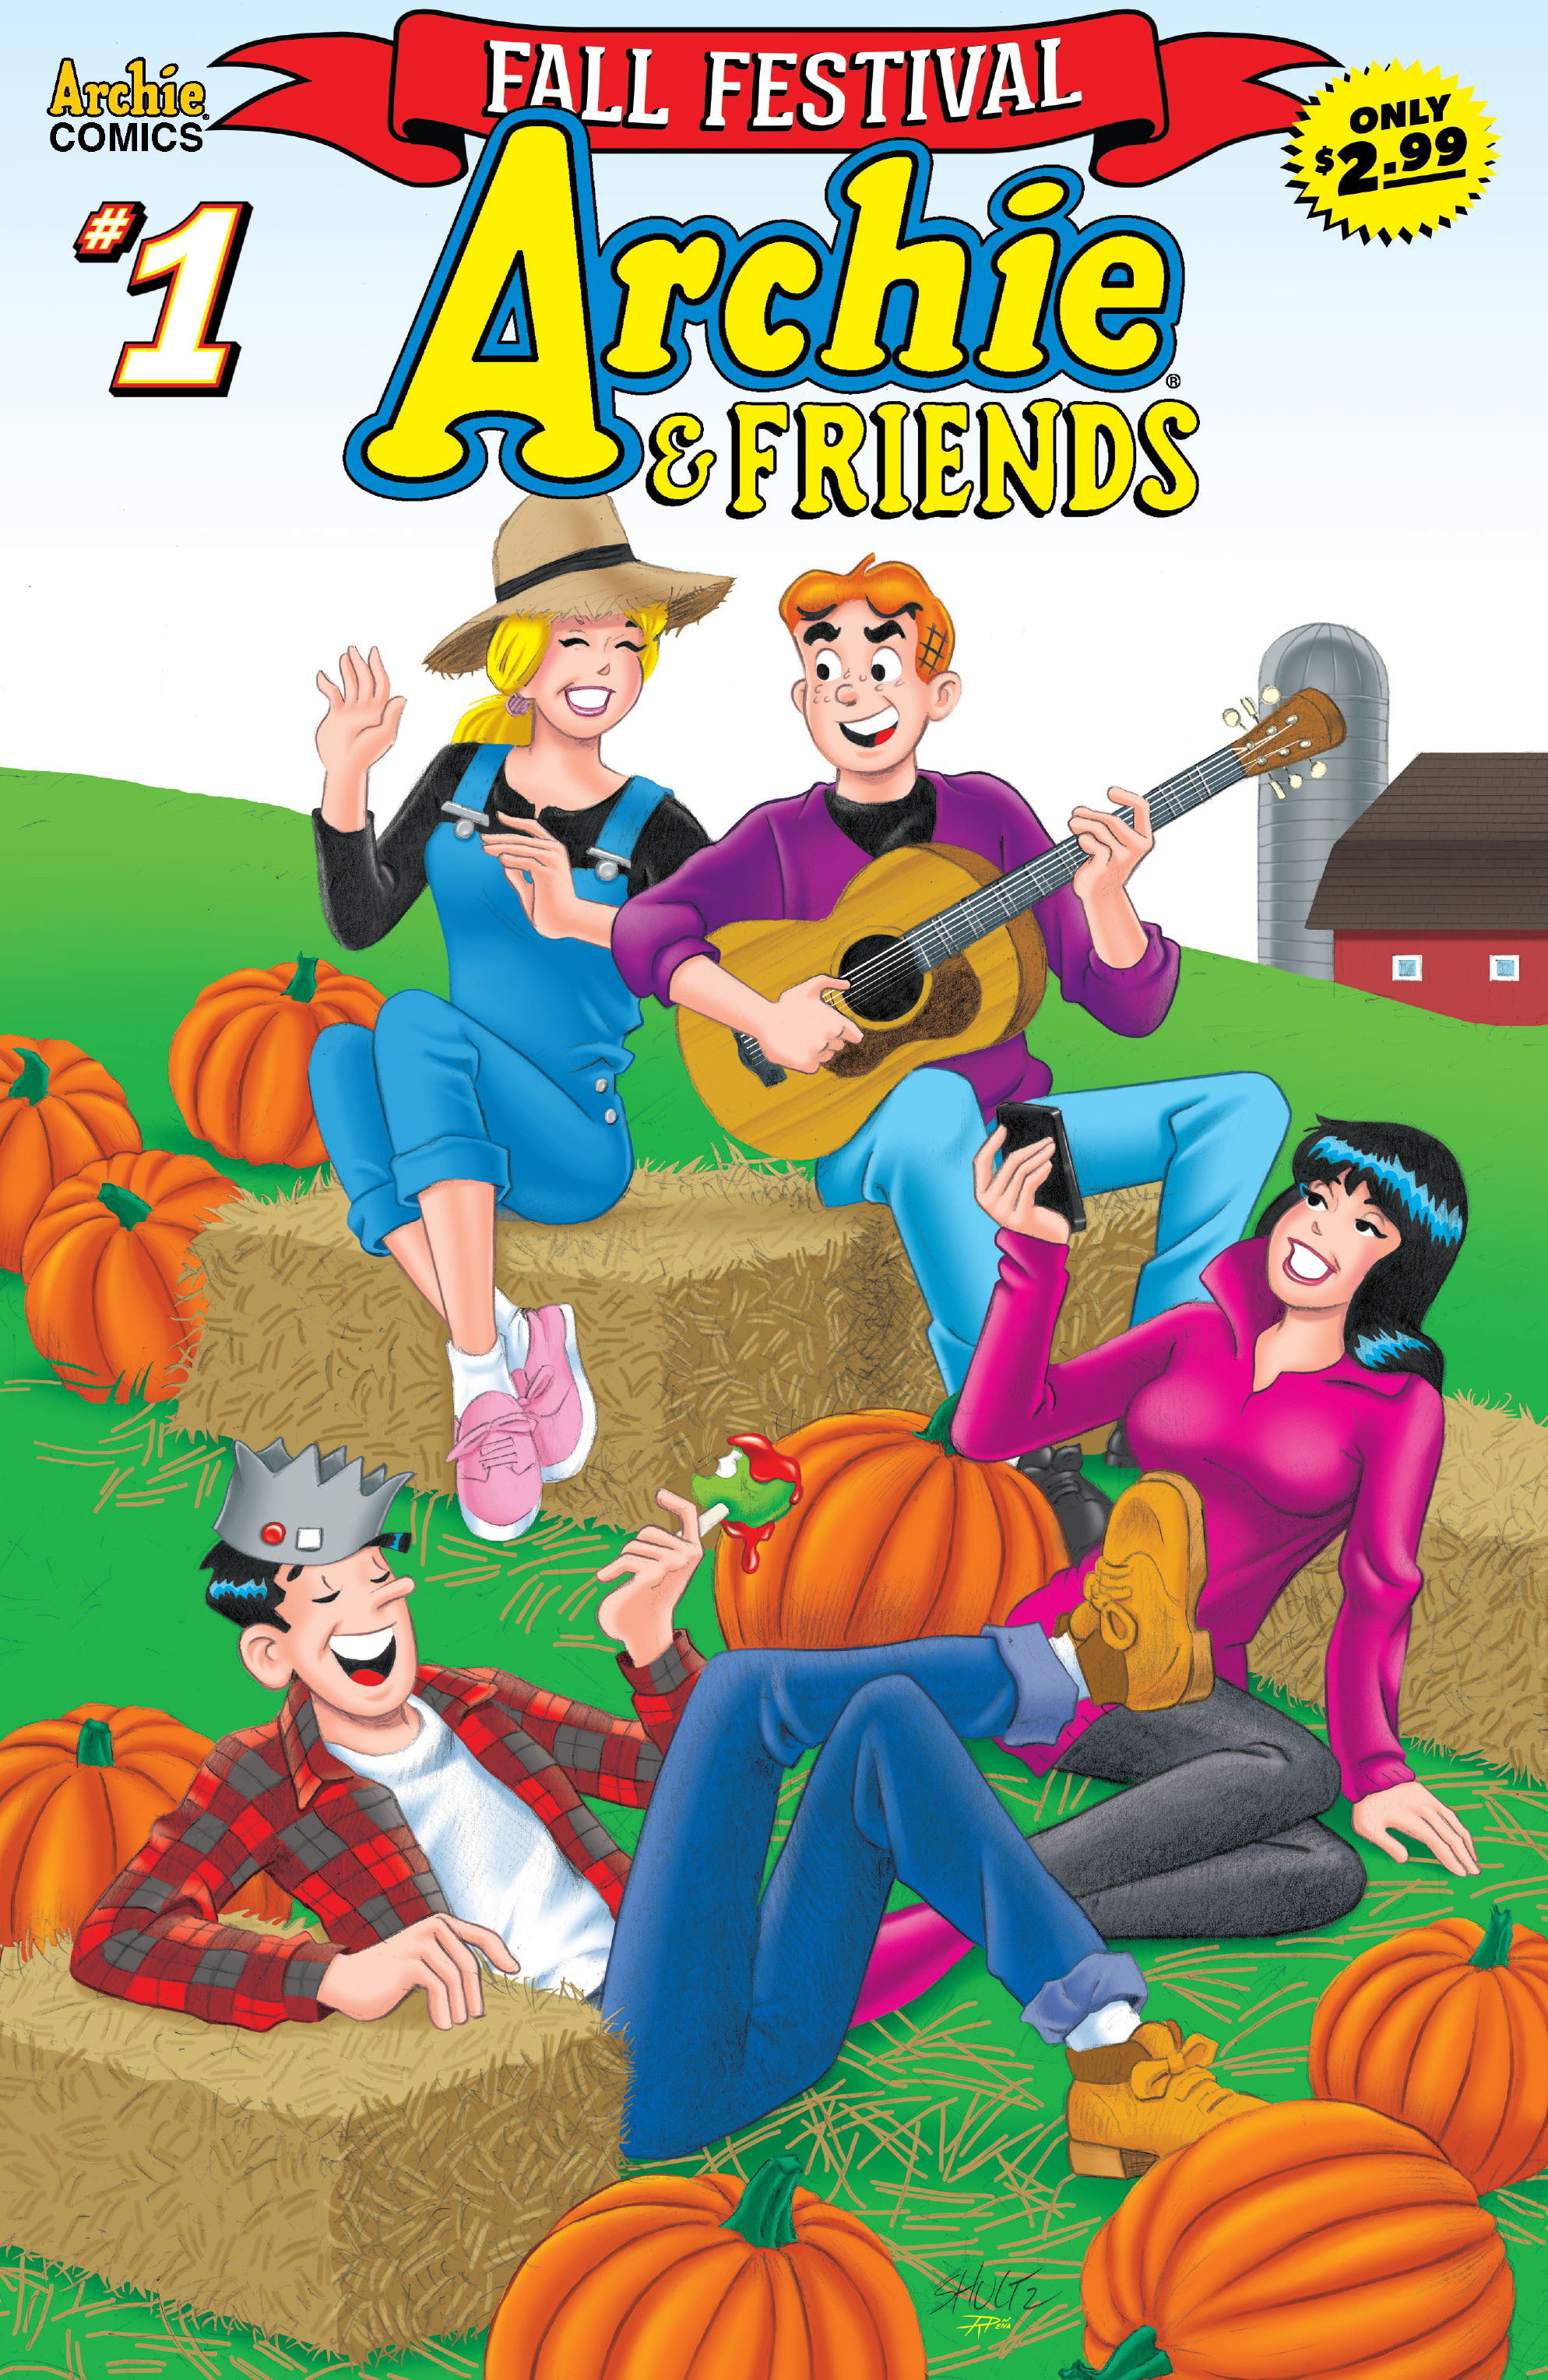 Archie & Friends Fall_Festival Page 1